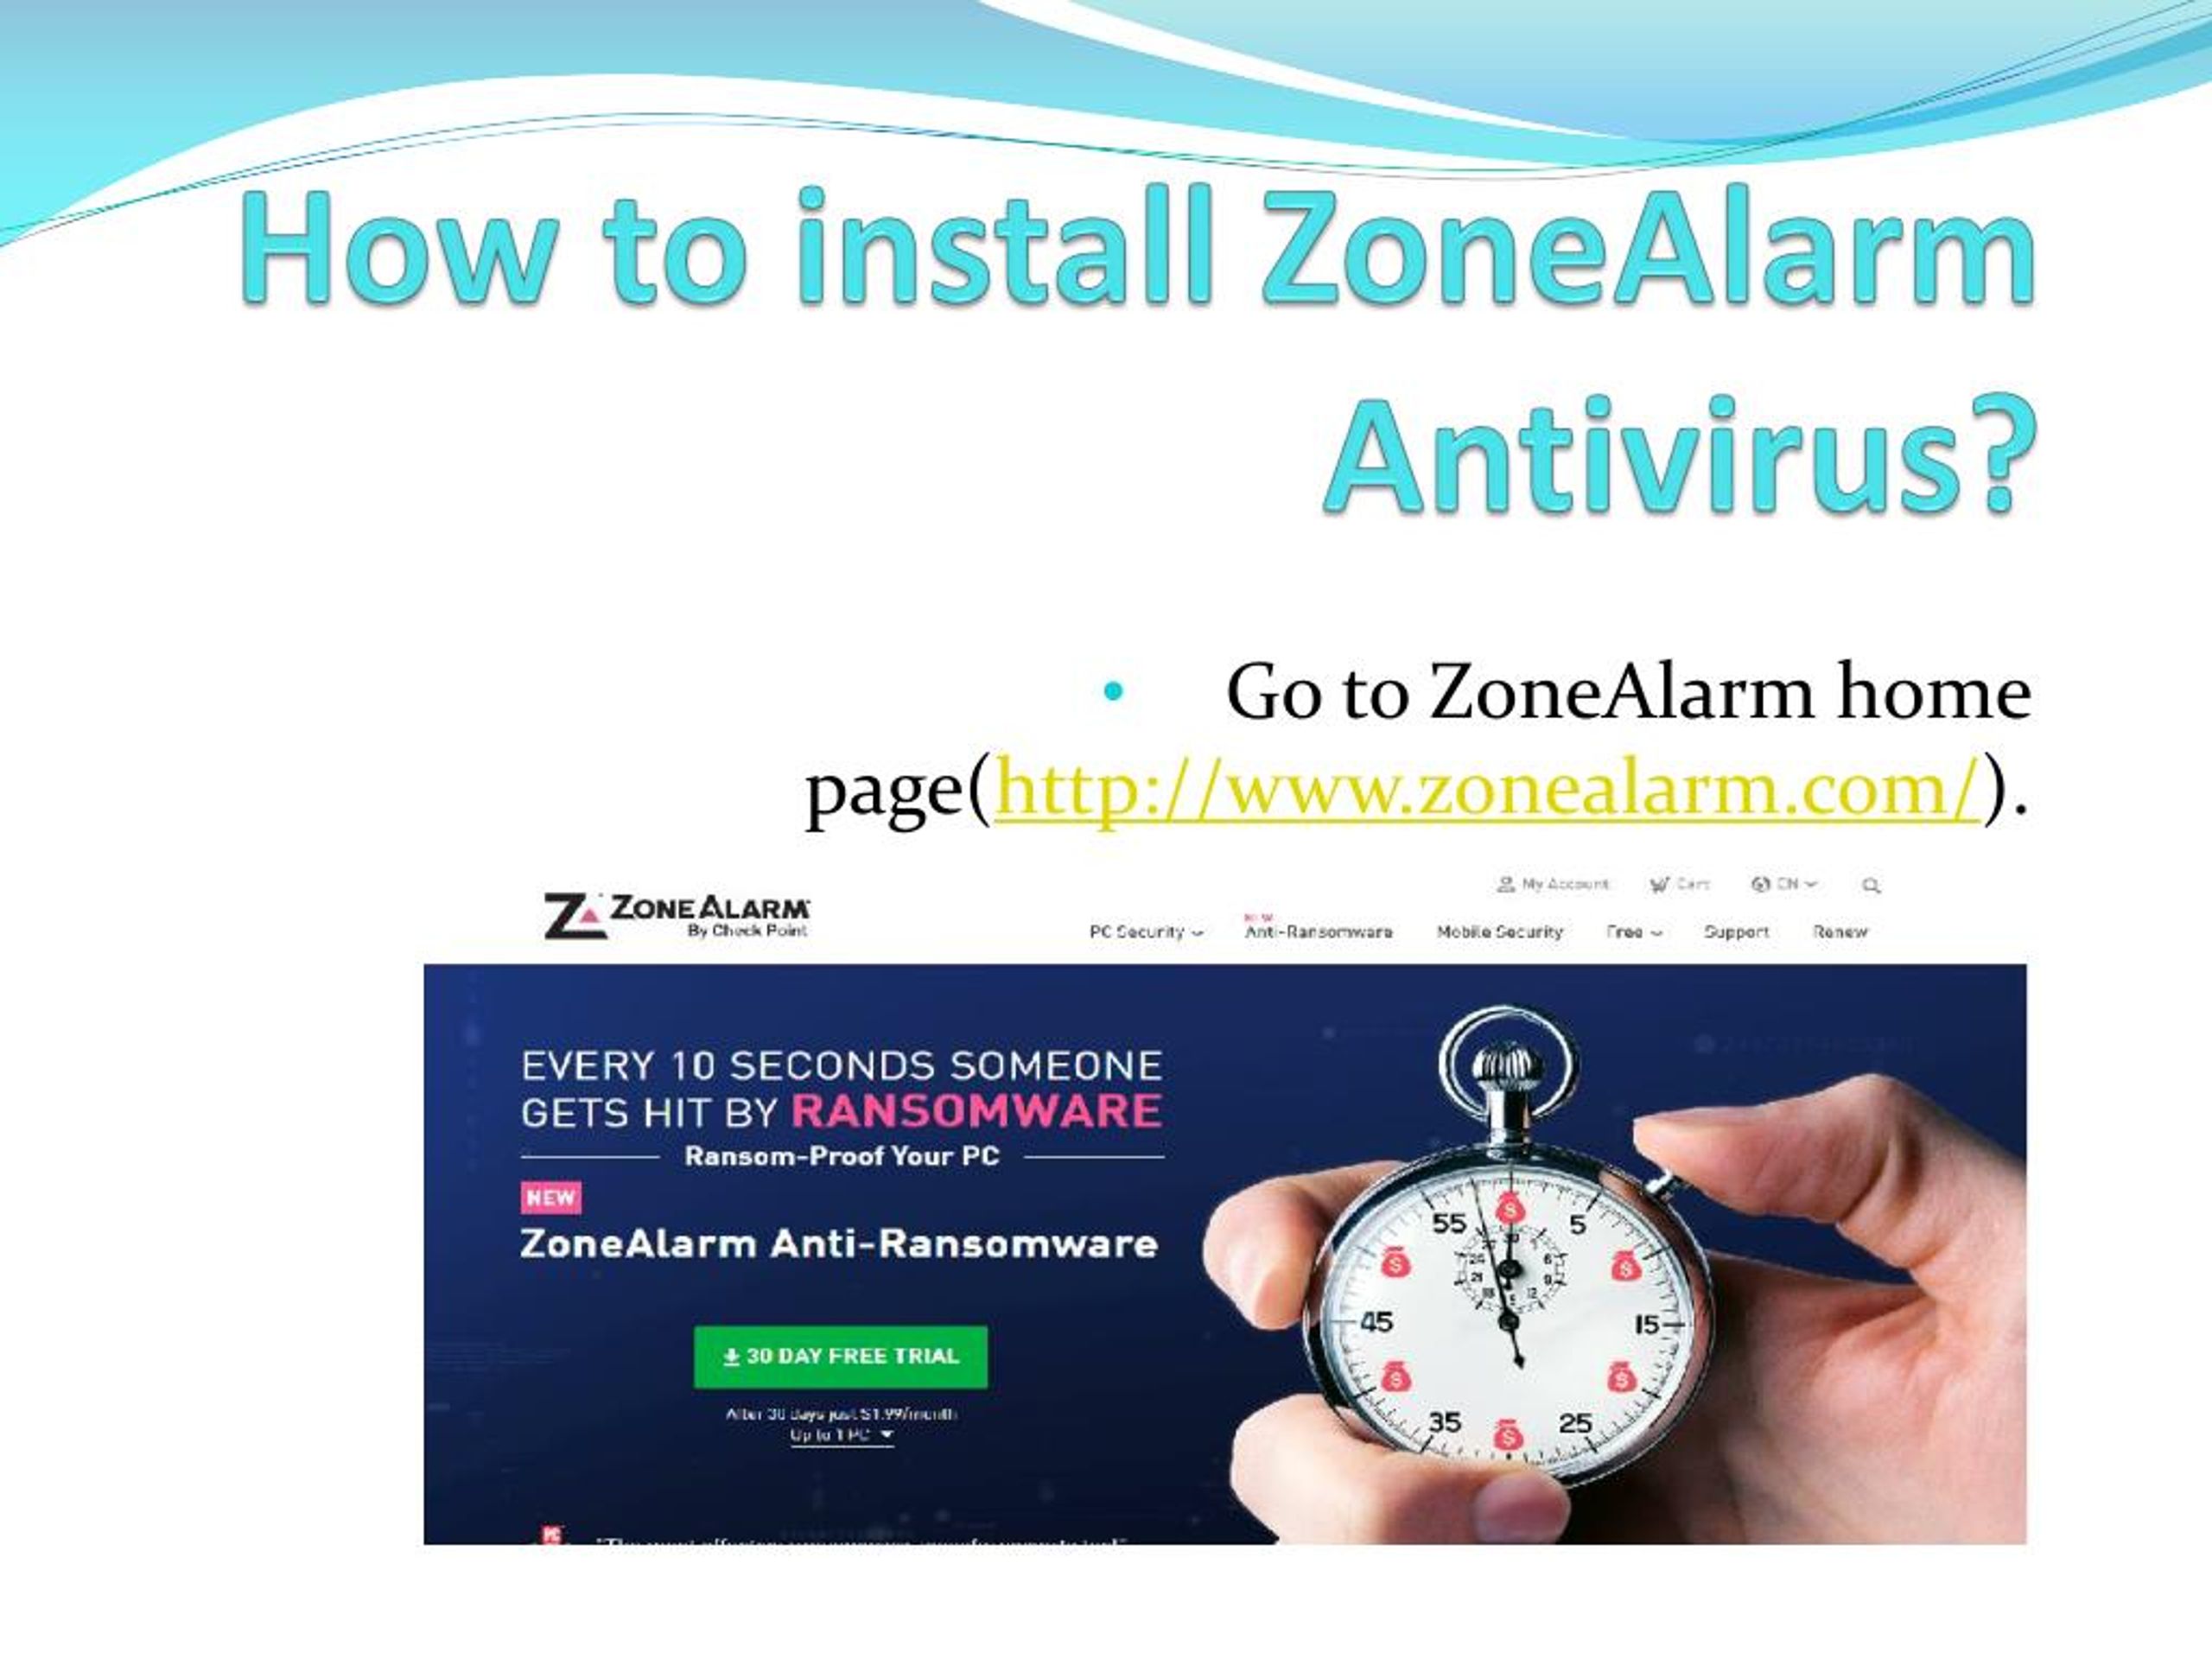 does zonealarm also have antivirus